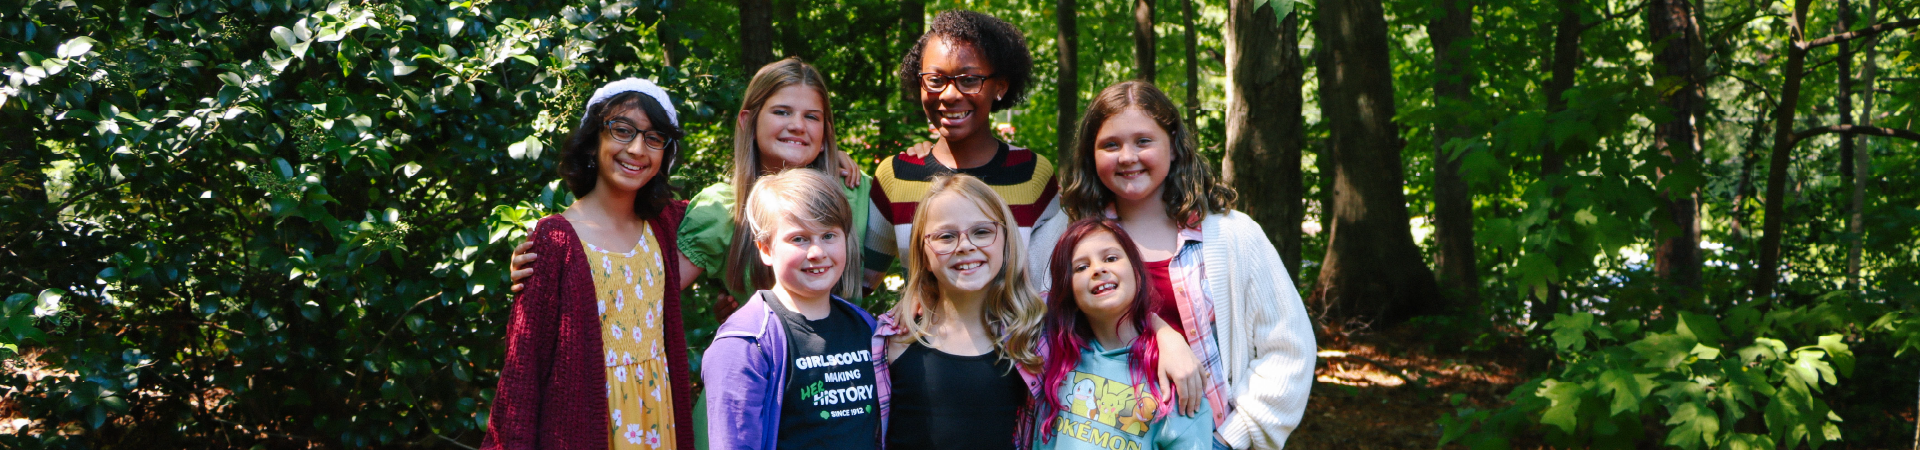  A group of Girl Scouts smile near the forest 